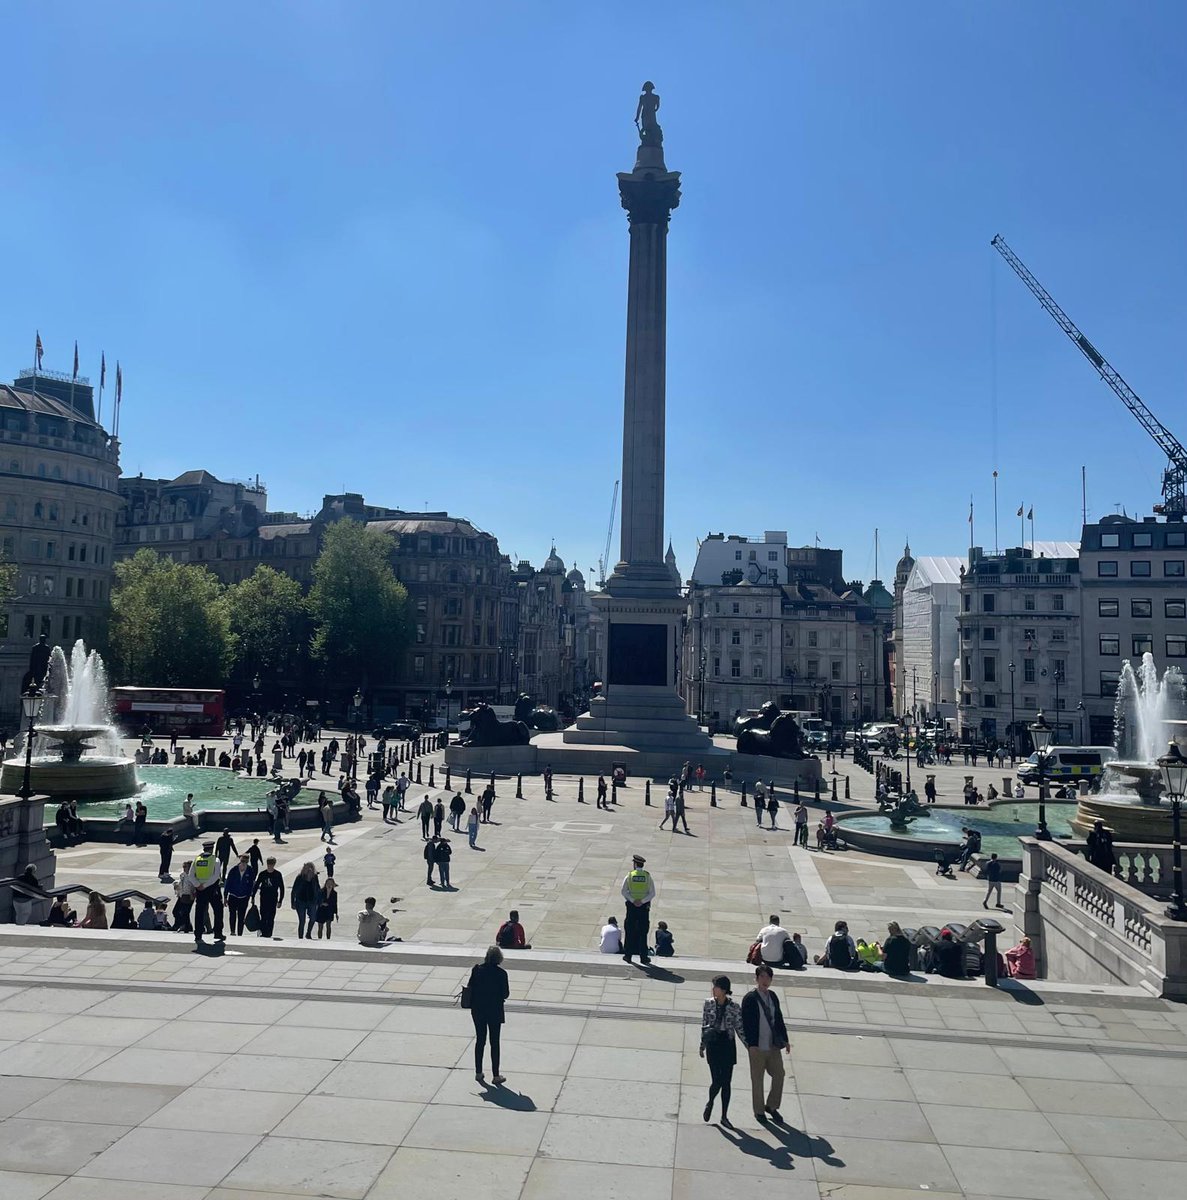 #ProjectServator officers deployed to Trafalgar Square in preparation for @MLBEurope. Our specially trained officers use a wide range of assets including plain clothes officers. If something doesn't feel right speak to security or report using Gov.uk/ACT.